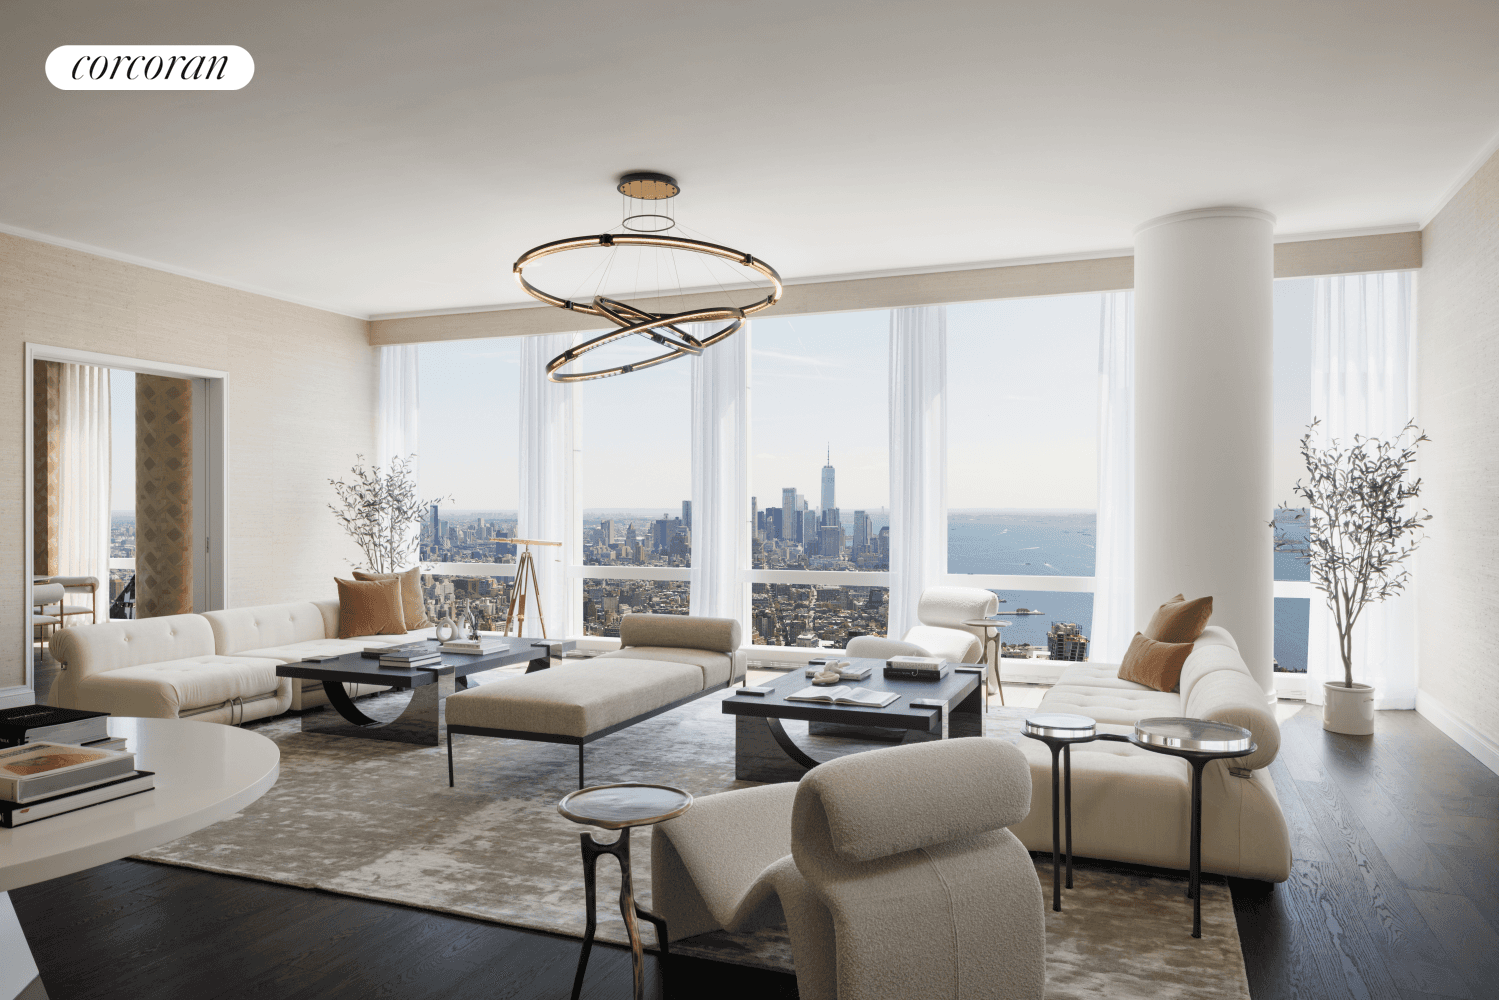 EXPERIENCE SWEEPING VIEWS OF THE HUDSON RIVER FROM THIS EXPANSIVE FIVE BEDROOM HOME SPANNING THE ENTIRE SOUTHERN FACADE OF THE BUILDING.